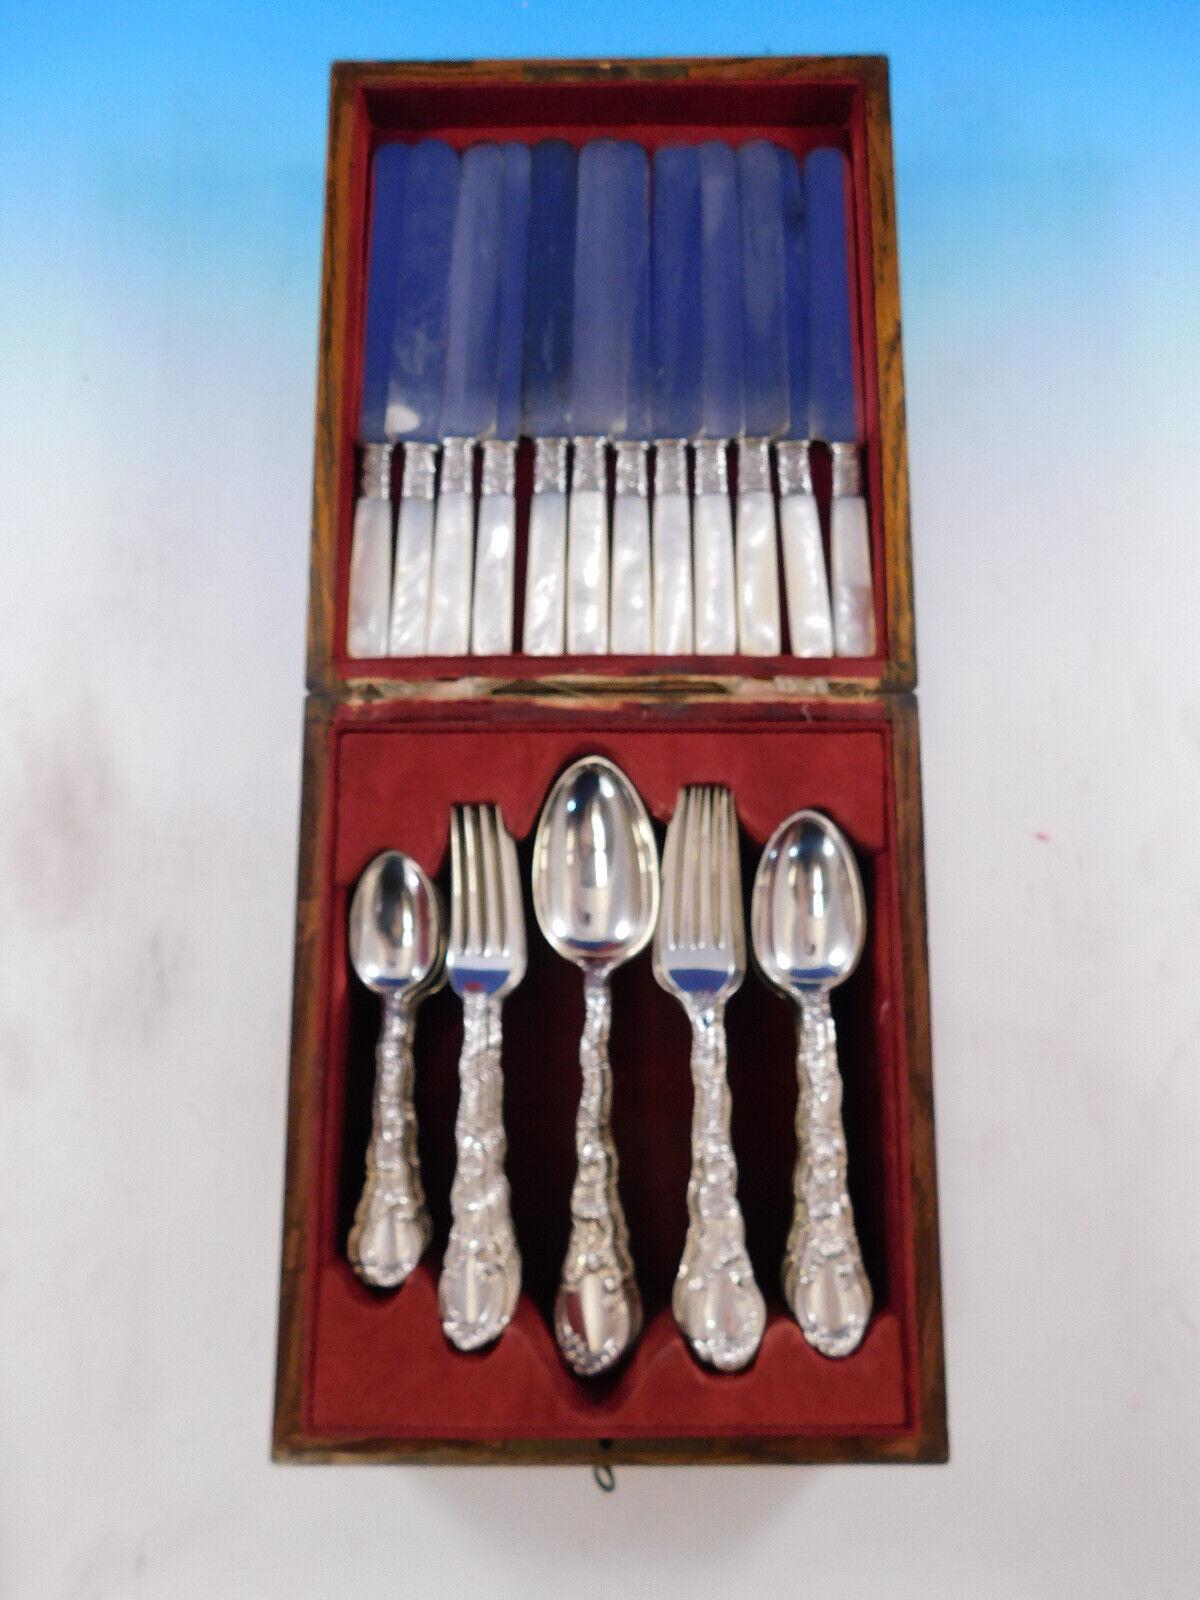 Rare Louis XV by Durgin, circa 1891, sterling silver Flatware set - 54 pieces (plus 12 Mother of Pearl handle knives). This set includes:

12 Mother of Pearl handle Knives, 8